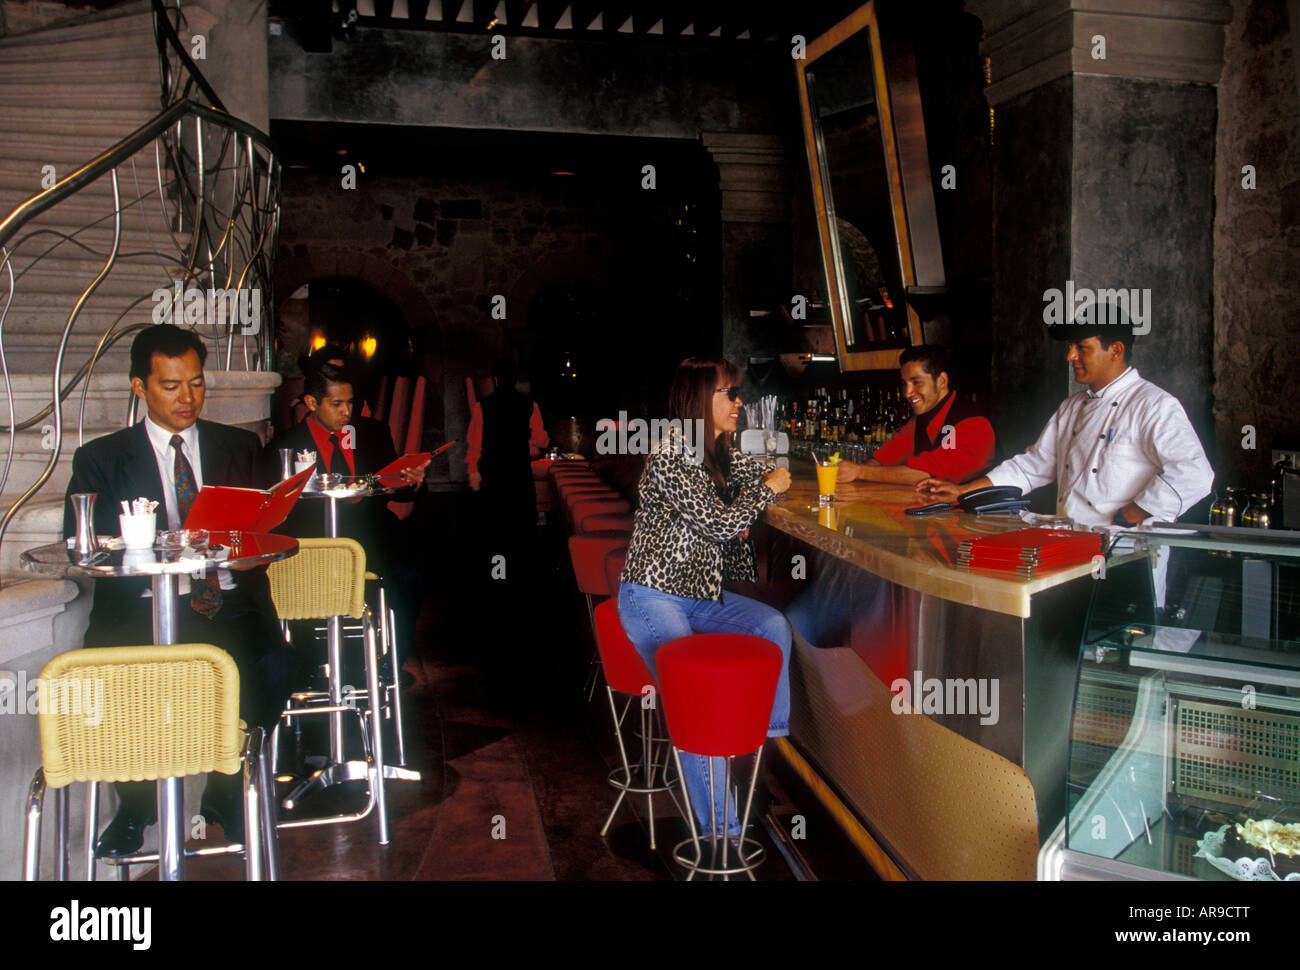 Mexicans, Mexican people, tourists, clients, customers, eating, dining room, Onix Restaurant Bar, Morelia, Michoacan State, Mexico Stock Photo